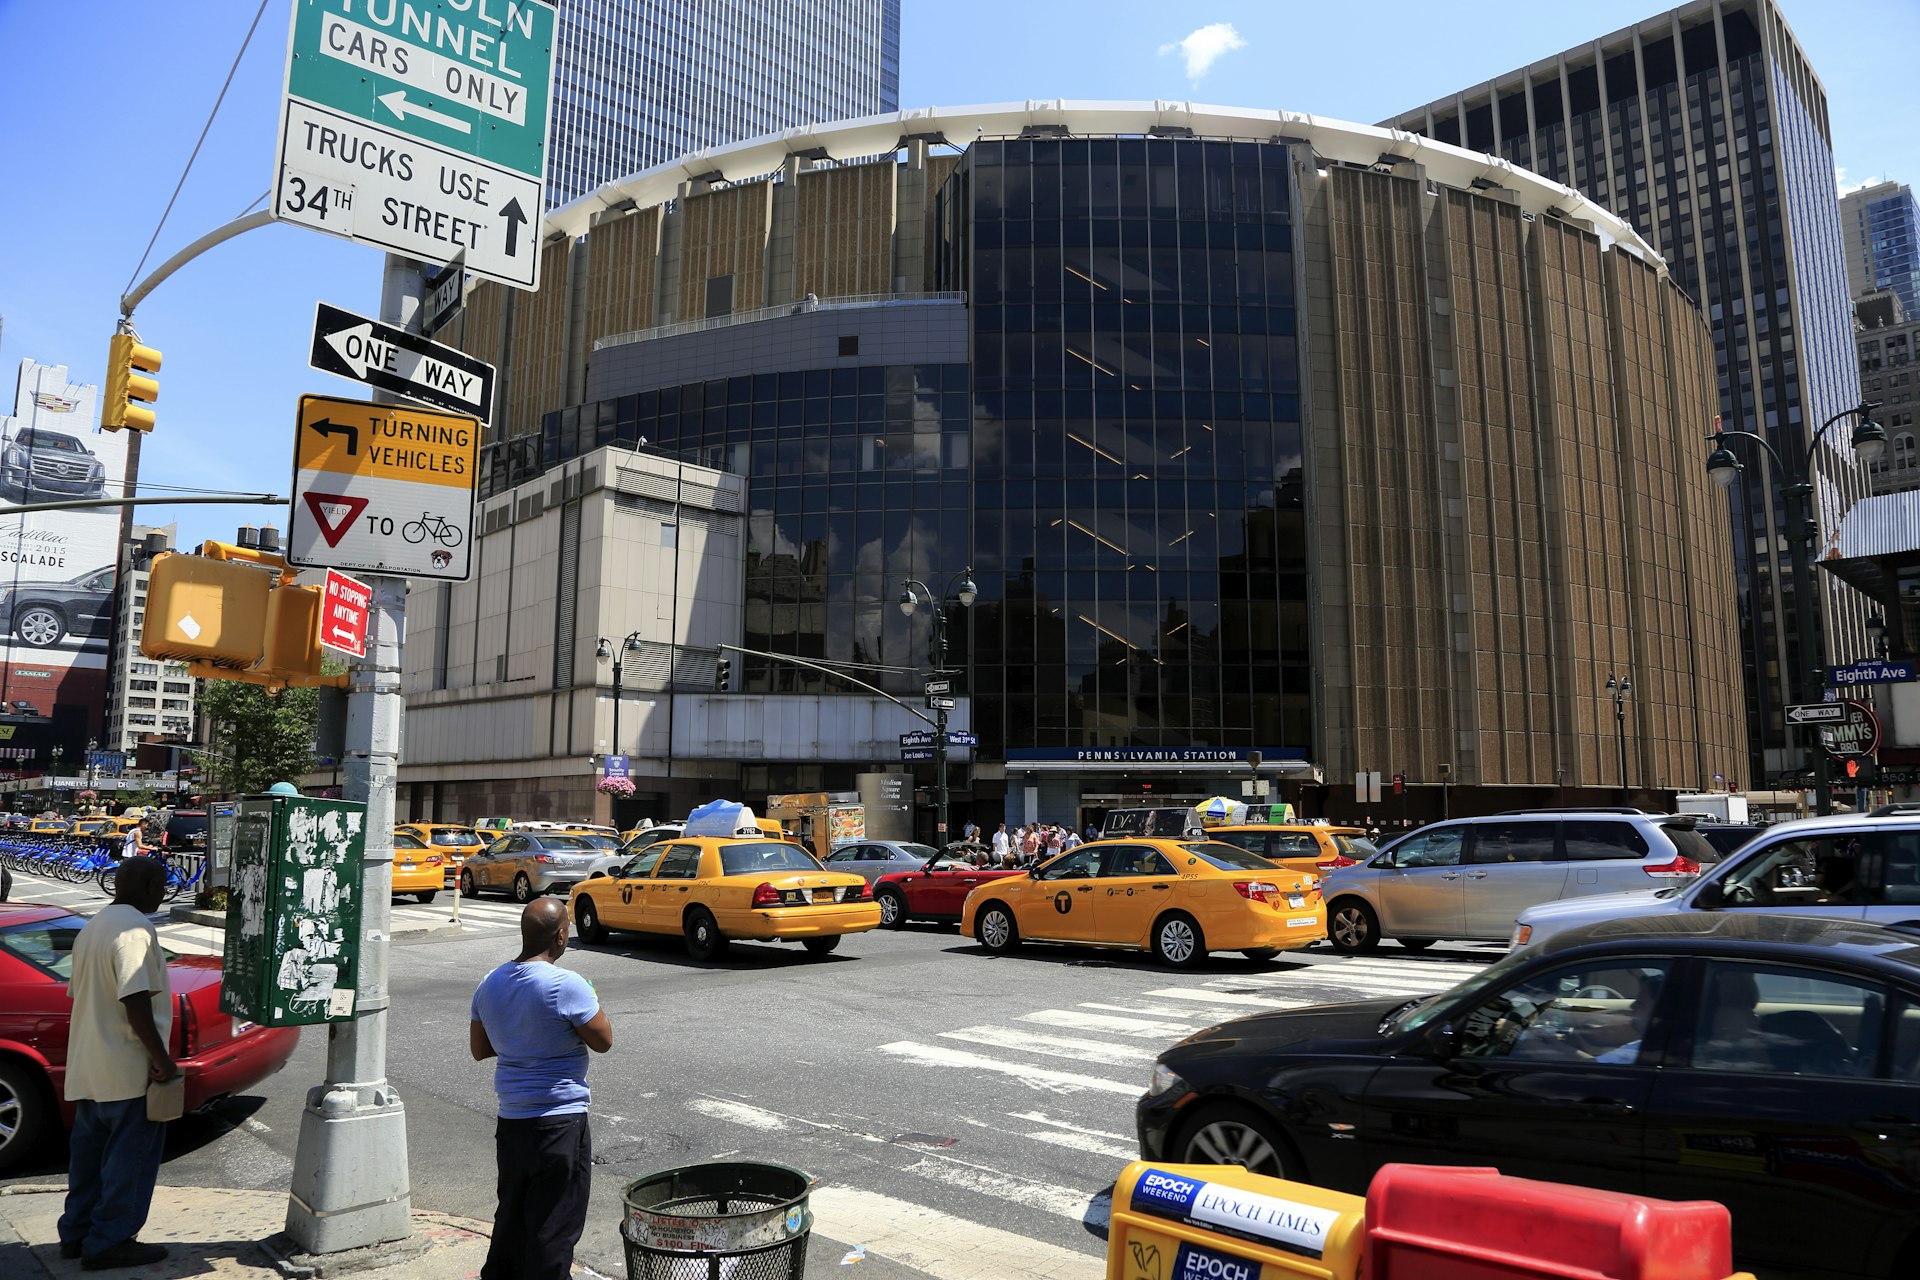 The exterior of a large entertainment complex with a curved facade. Many yellow taxis are passing in the street 